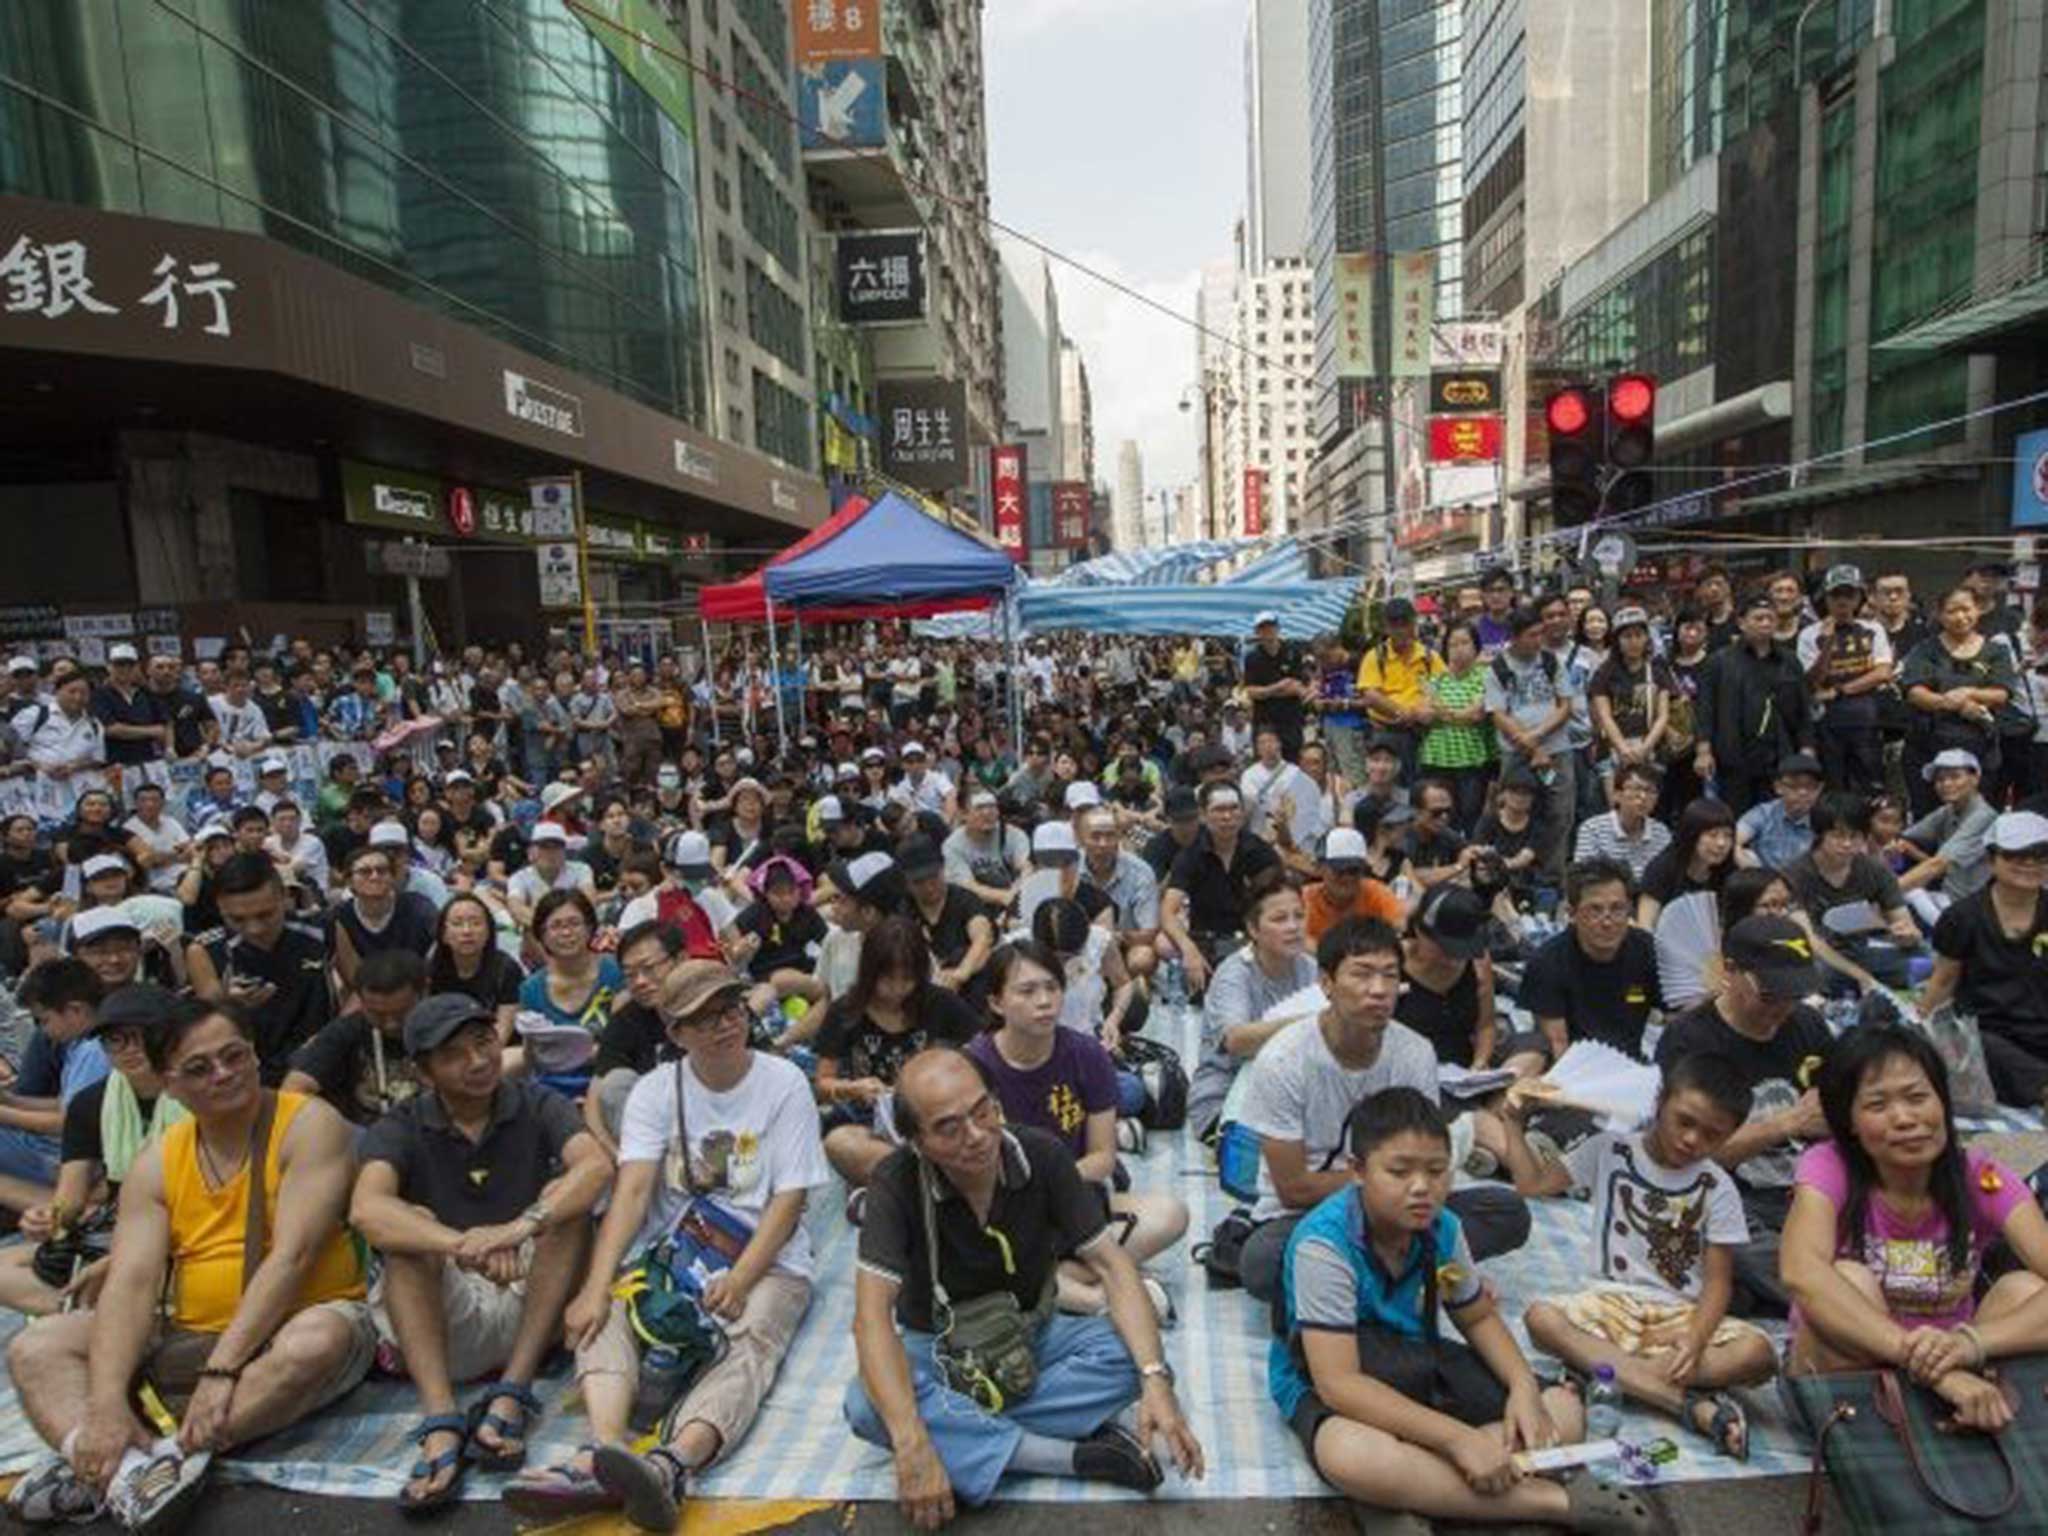 Hong Kong's protests are still going strong despite increasingly violent tactics being used by the police